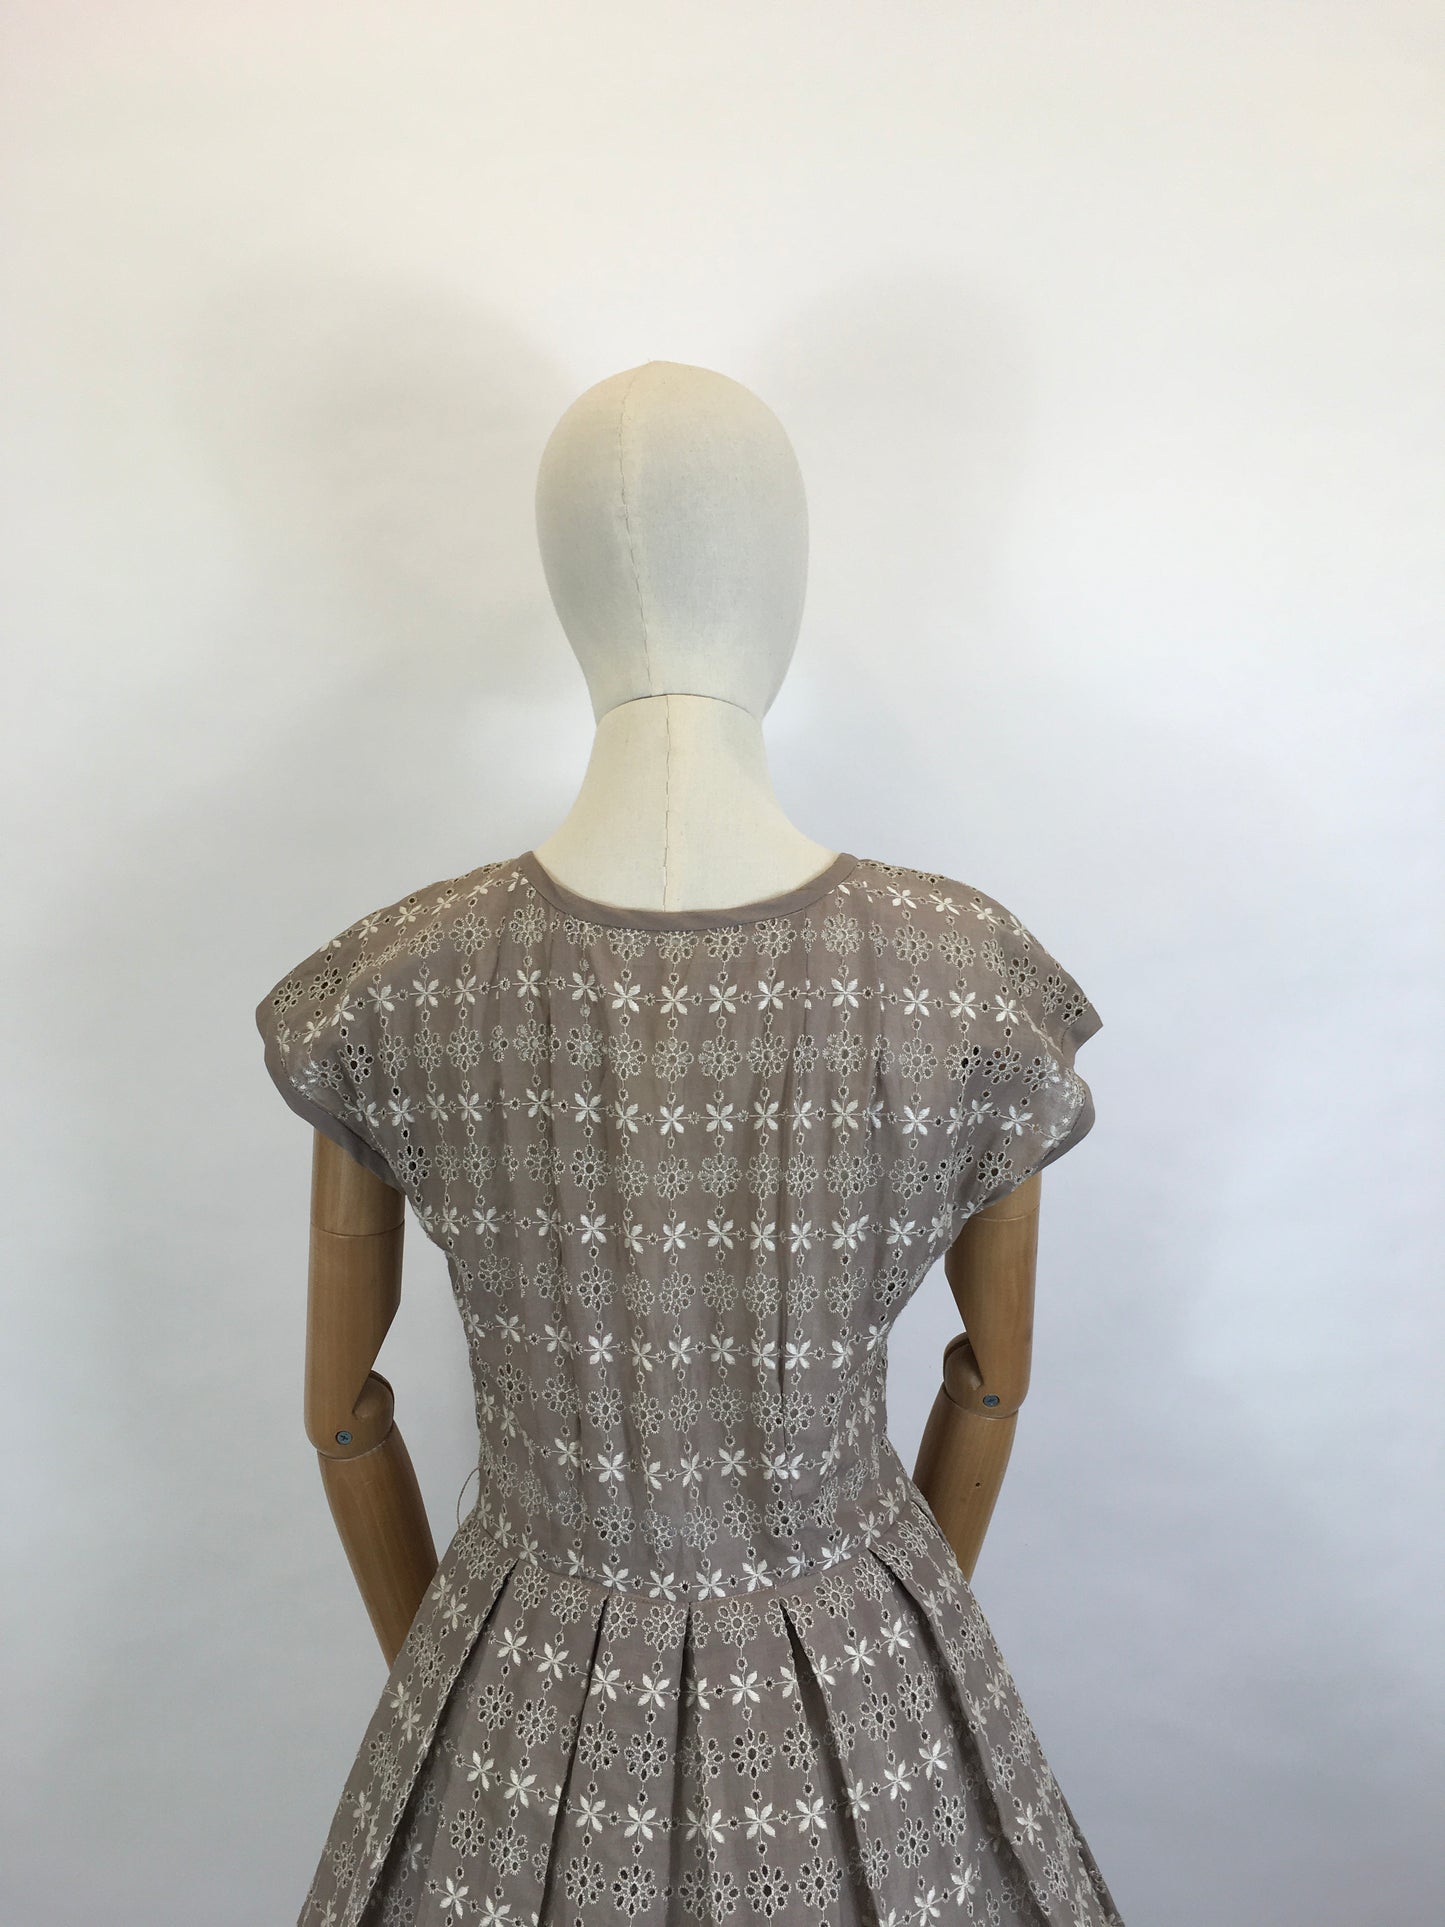 Original 1950’s Darling Broderie Anglaise Cotton Day Dress - In a Soft Fawn with White Accents